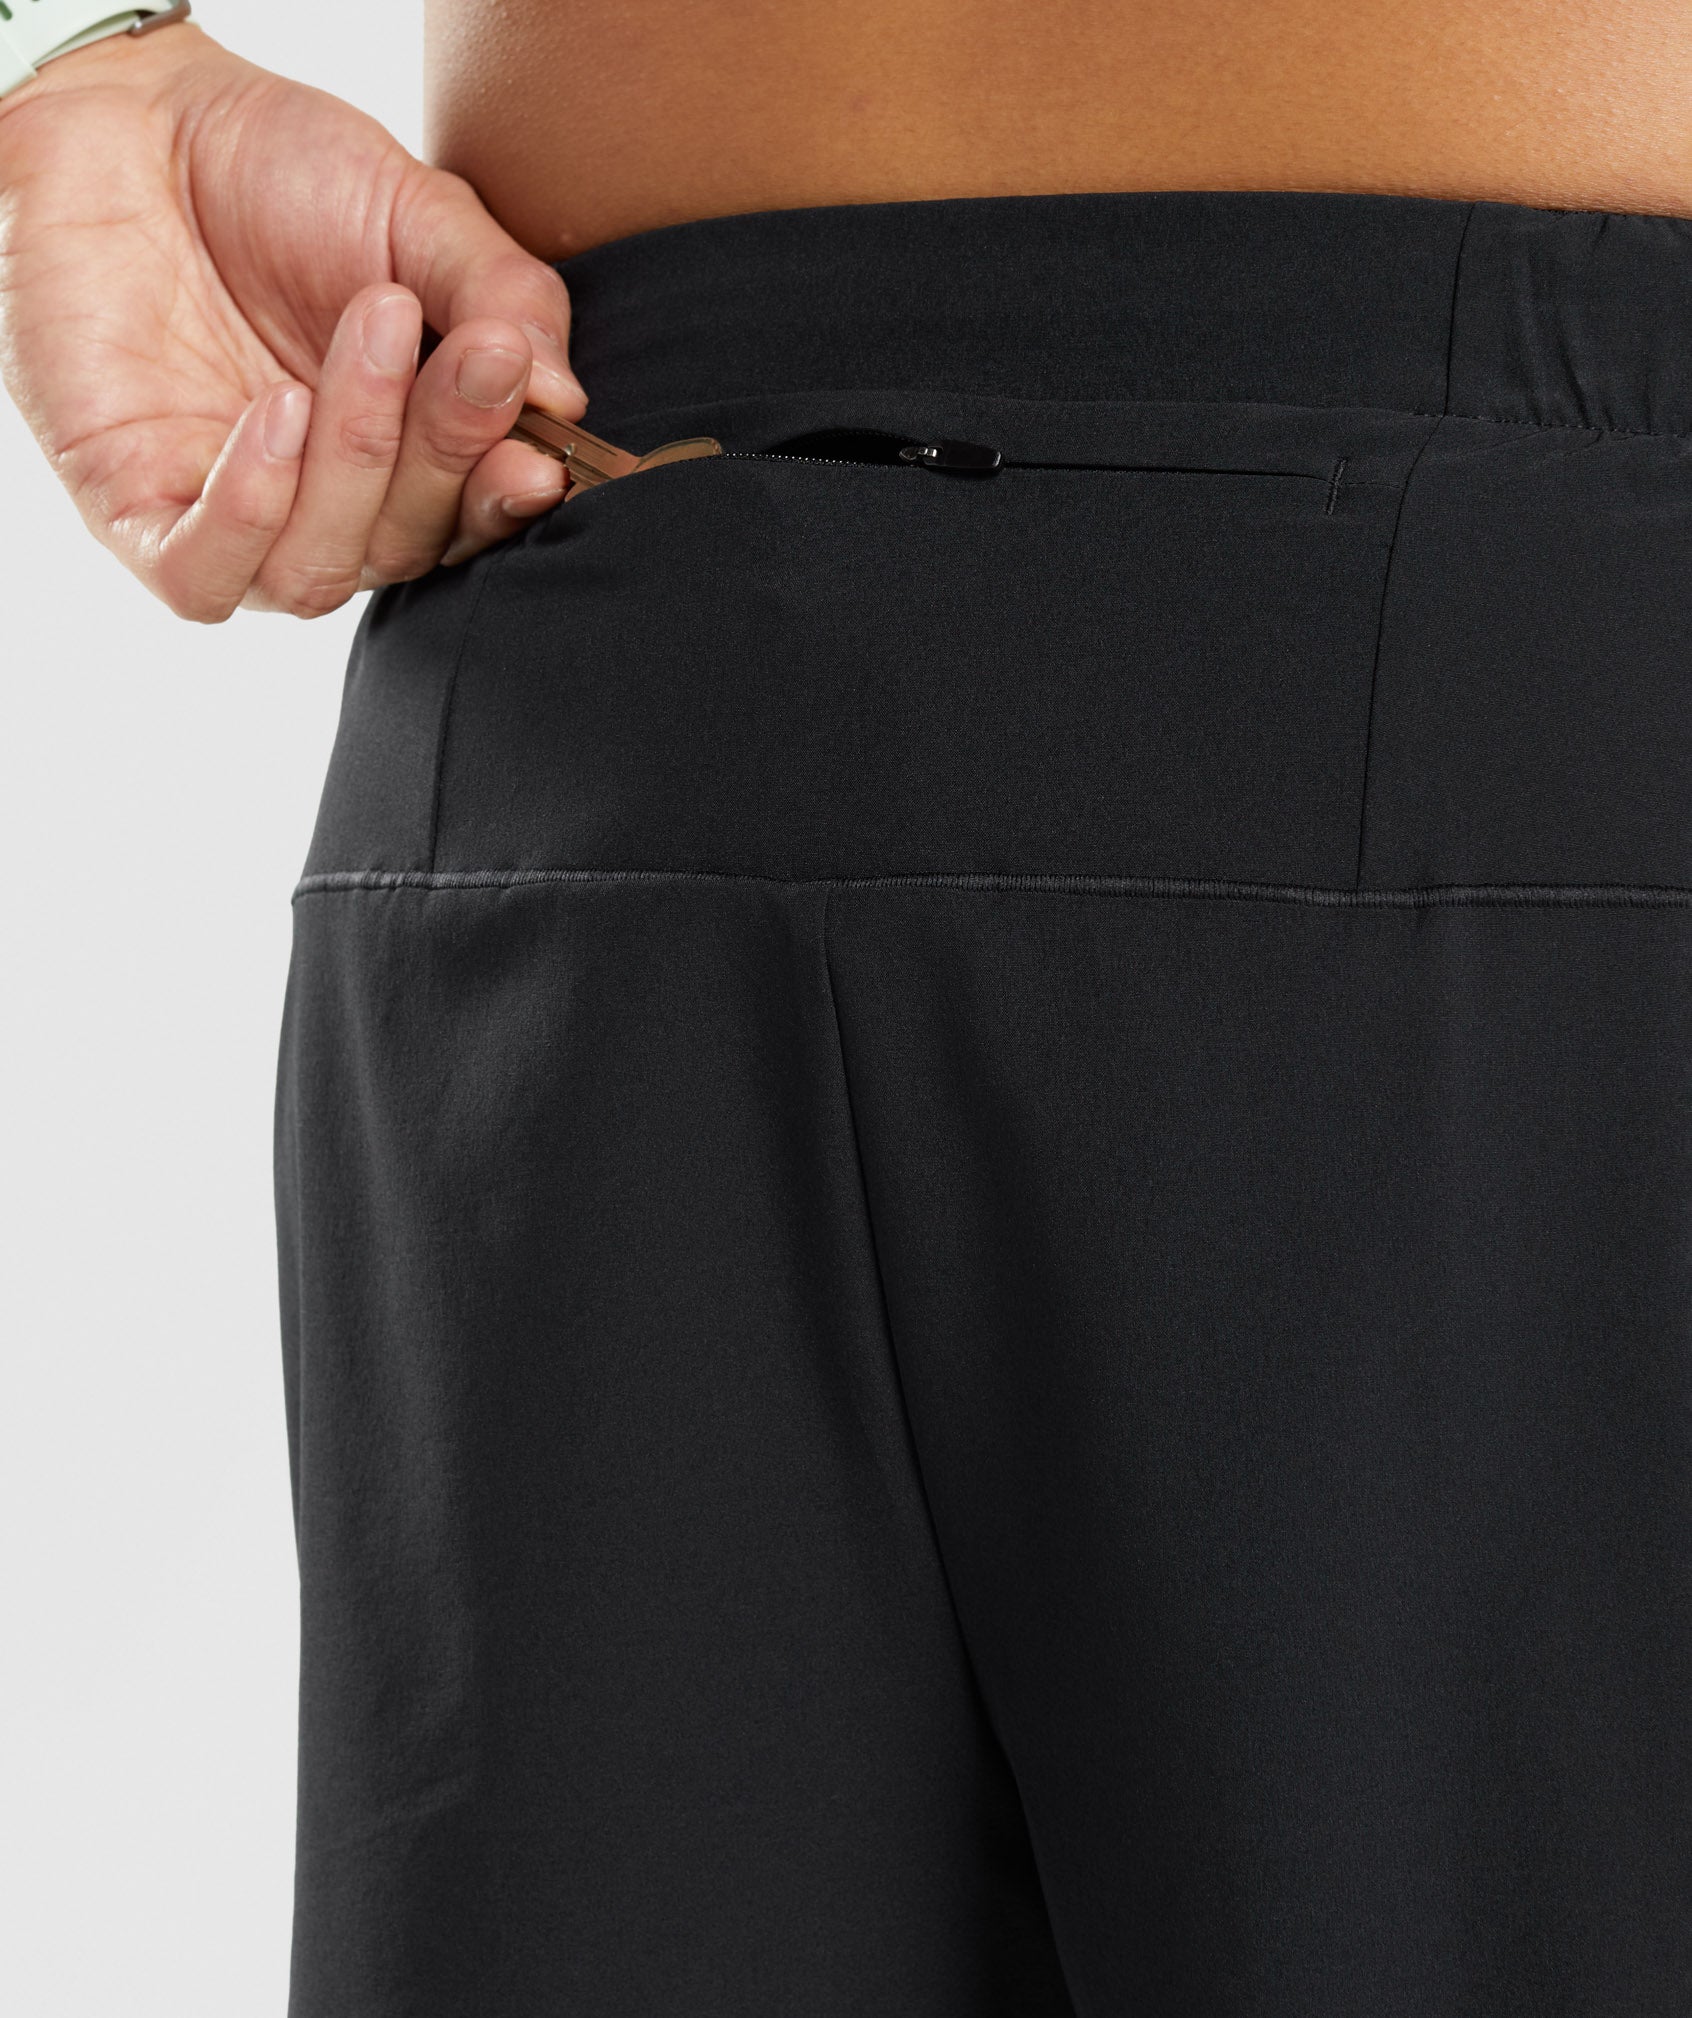 Speed 5" 2 In 1 Shorts in Black - view 5